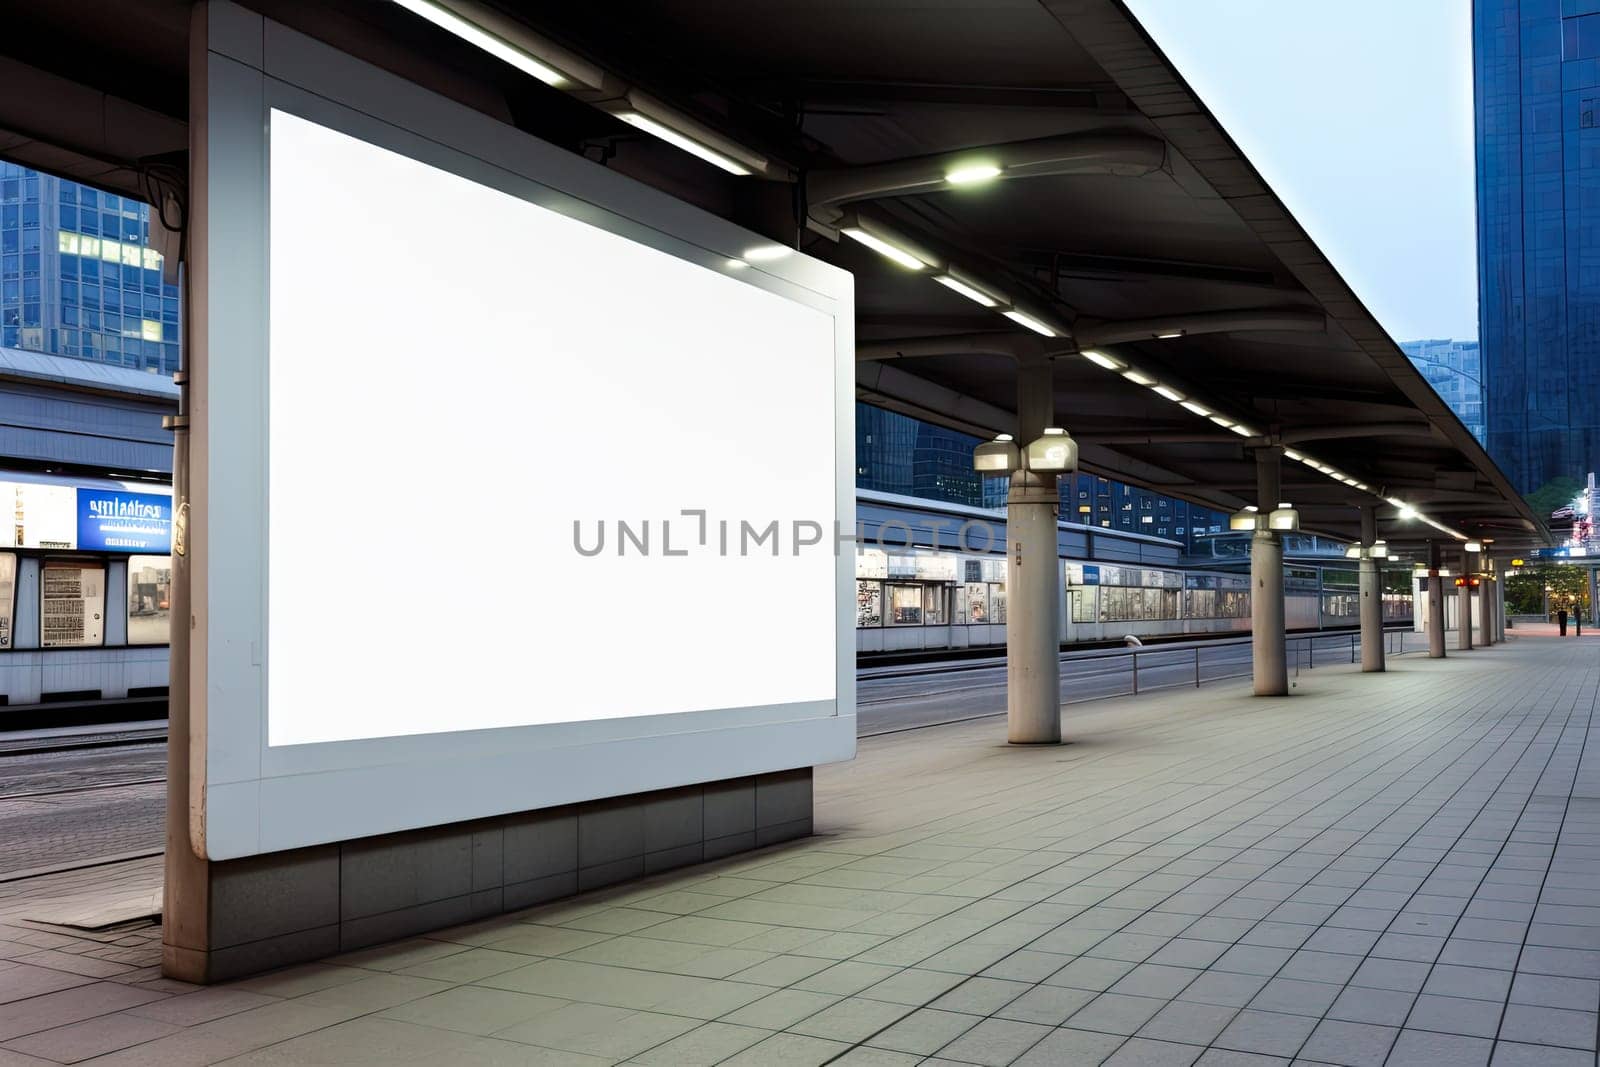 Empty white Blank Billboard or Advertising Poster in a City and Roadside Perfect Space for Promoting Your Brand Products.by Generative AI.